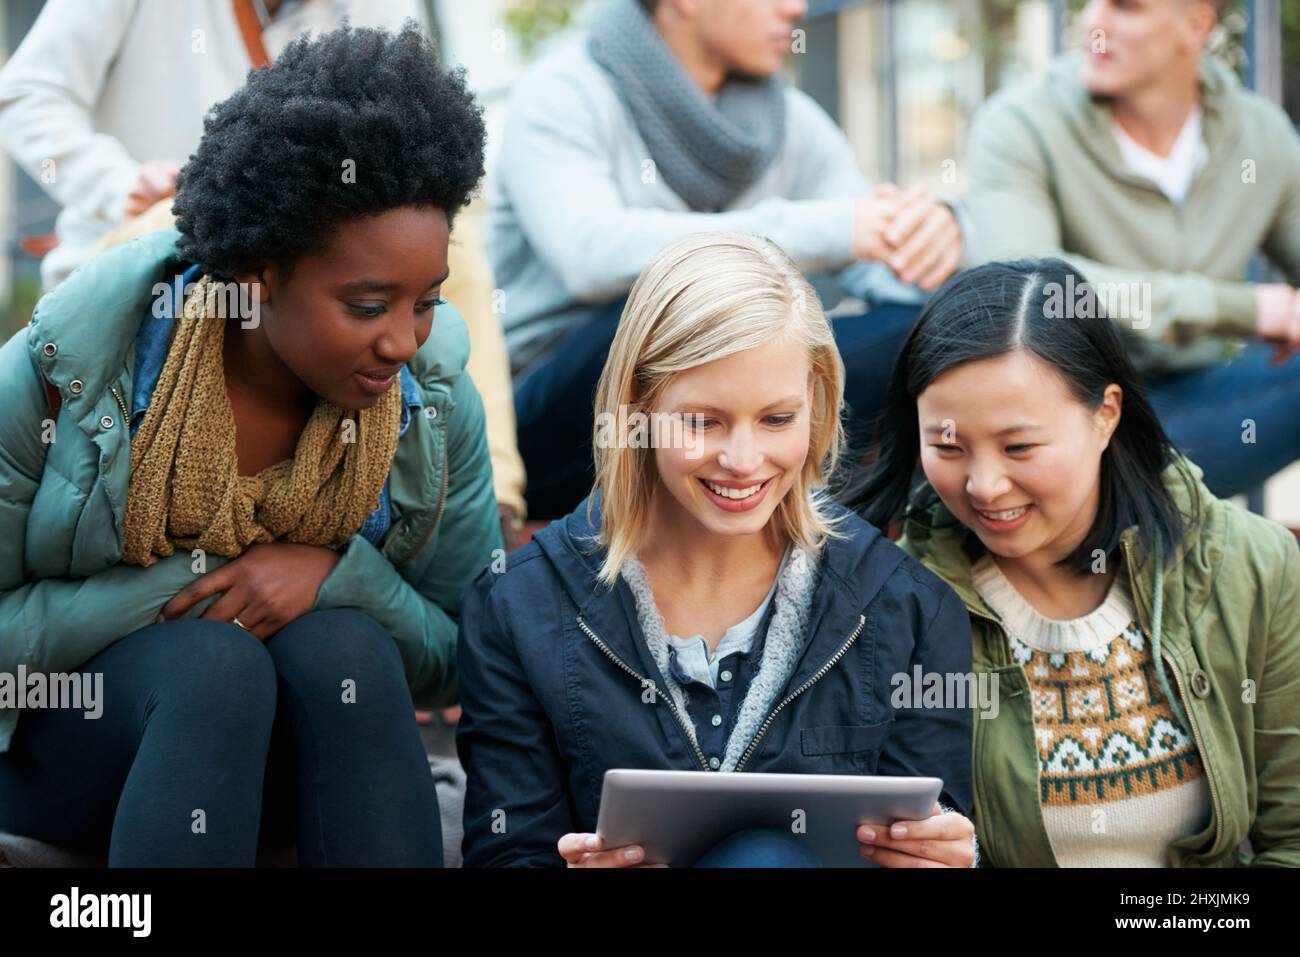 Look at this. Shot of a group of university students looking at something on a digital tablet. Stock Photo